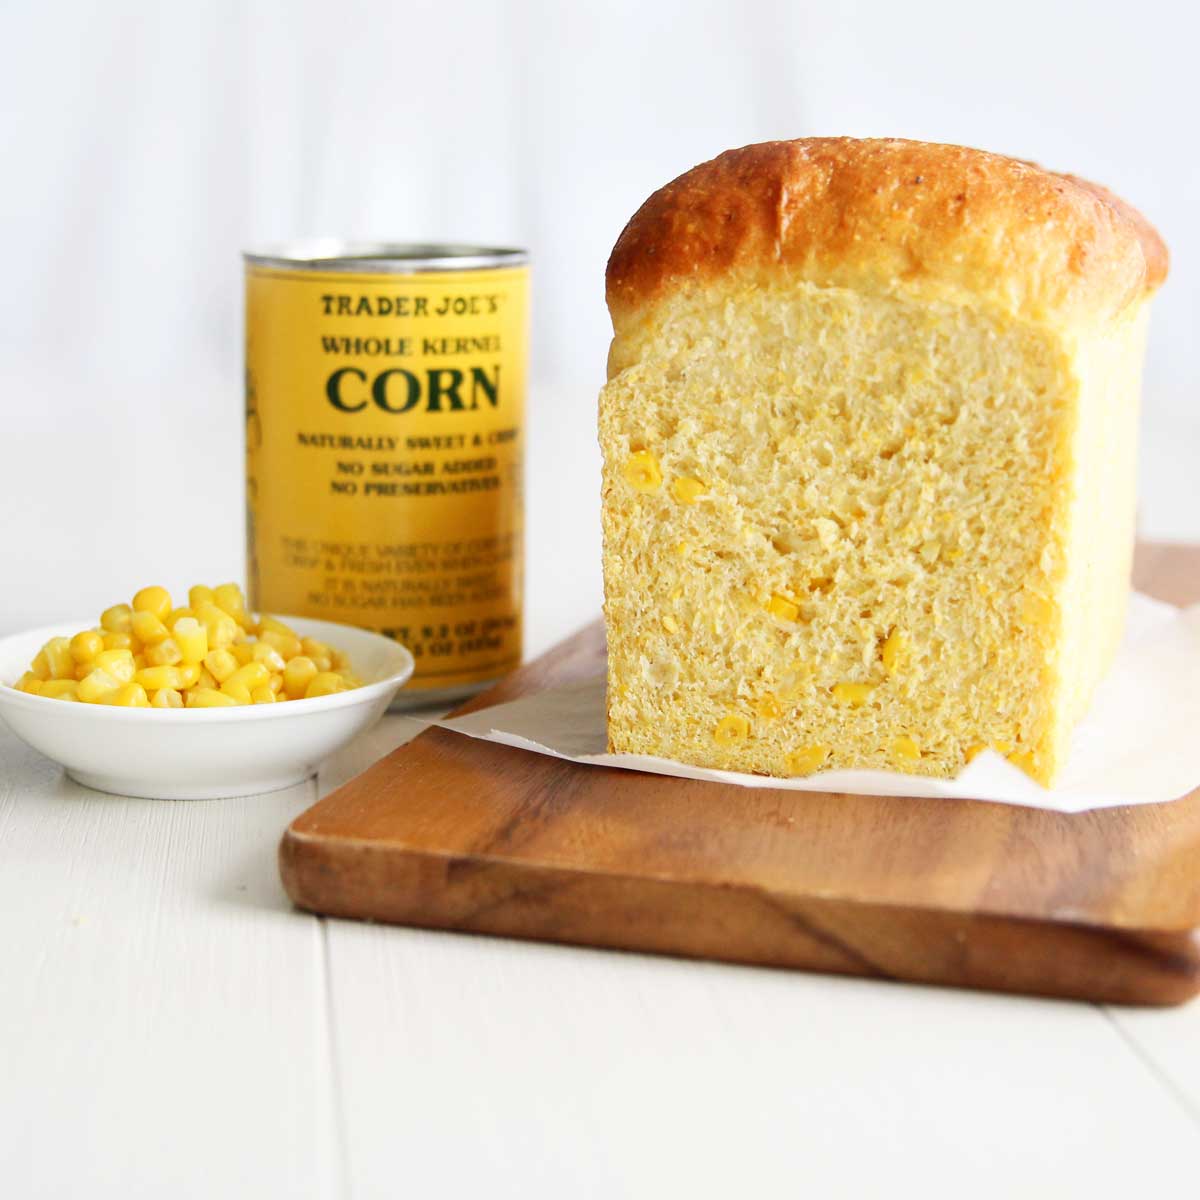 Yeasted Cornbread Recipe (Vegan Sandwich Bread Made with Canned Corn) - Roasted Corn Naan